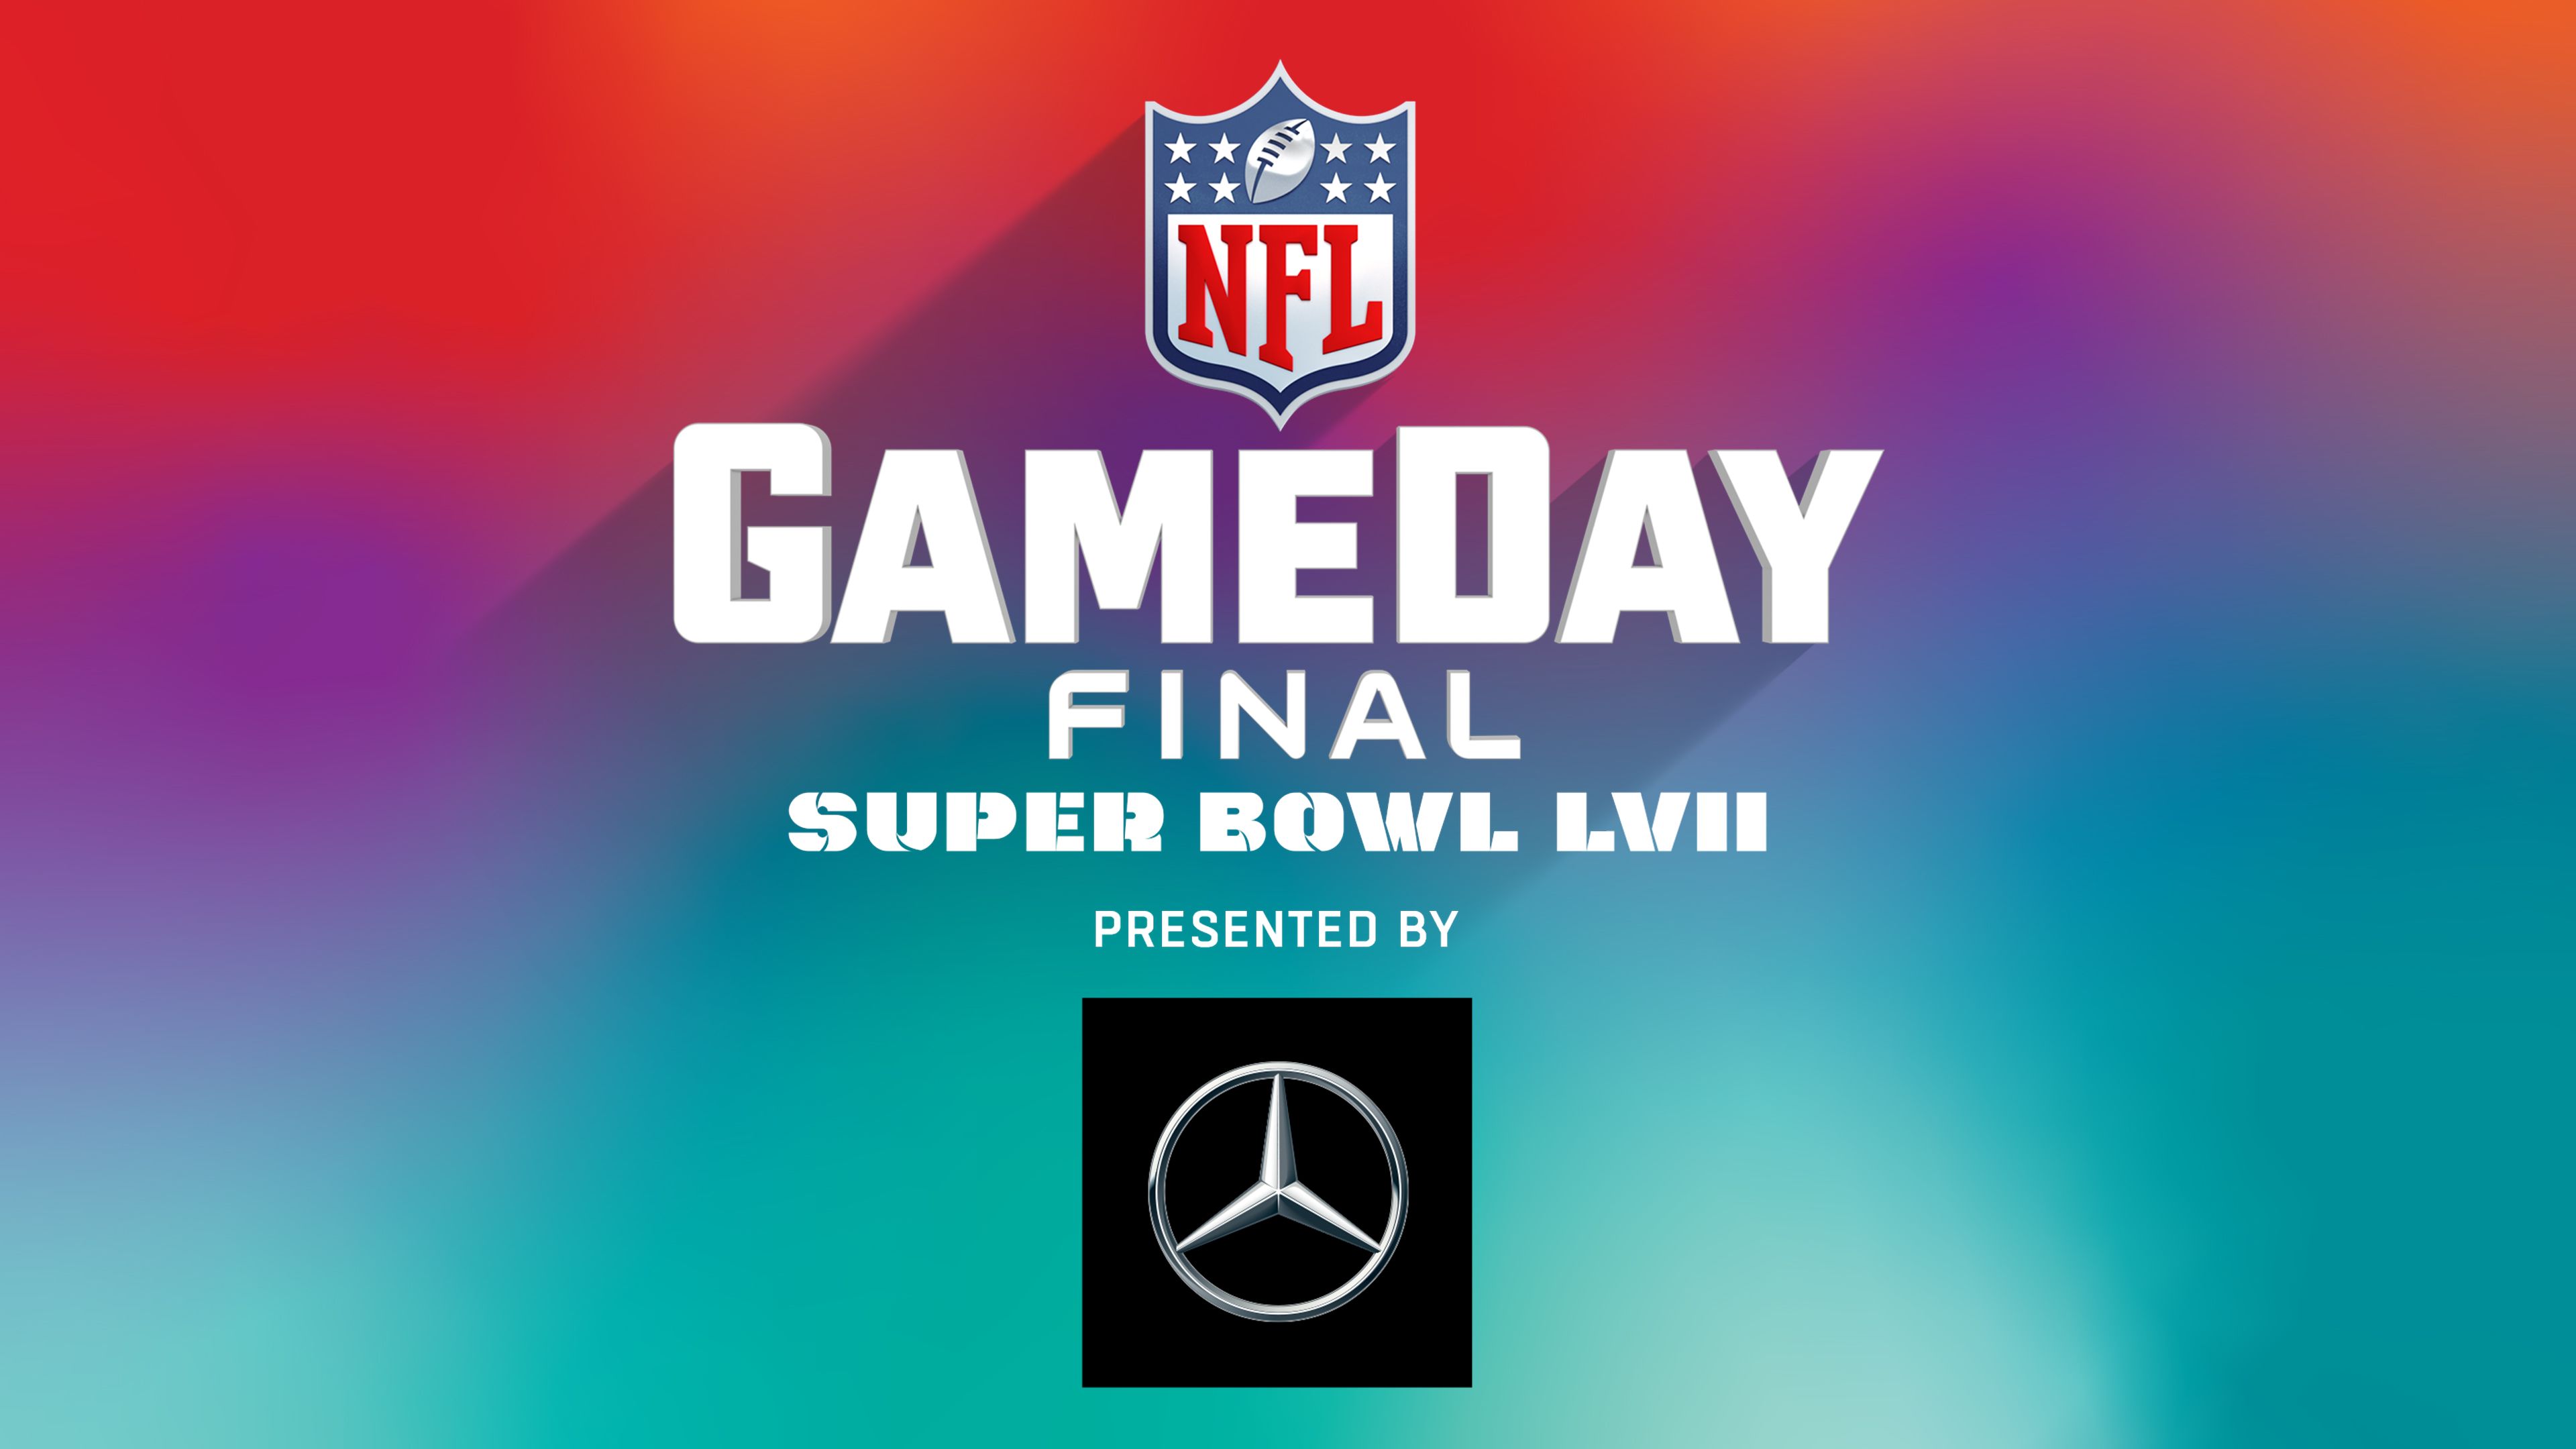 Find out the backstory for the Super Bowl LVII logo